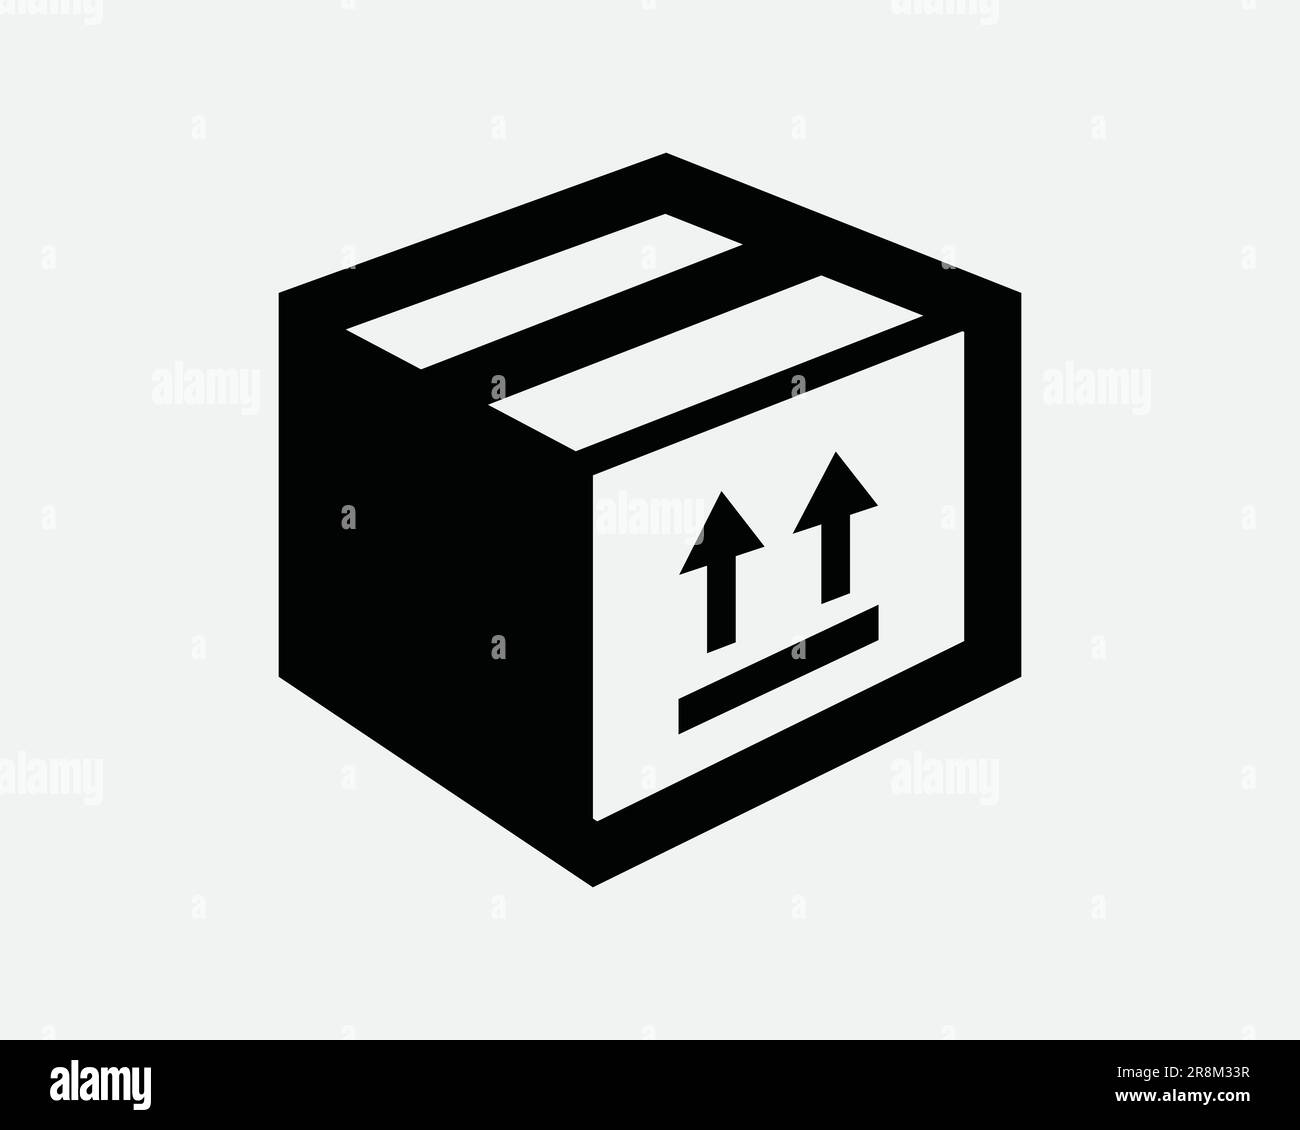 Shipping Box with Arrows Icon. Package Packaging Courier Shipment Delivery. Black White Sign Symbol Illustration Artwork Graphic Clipart EPS Vector Stock Vector